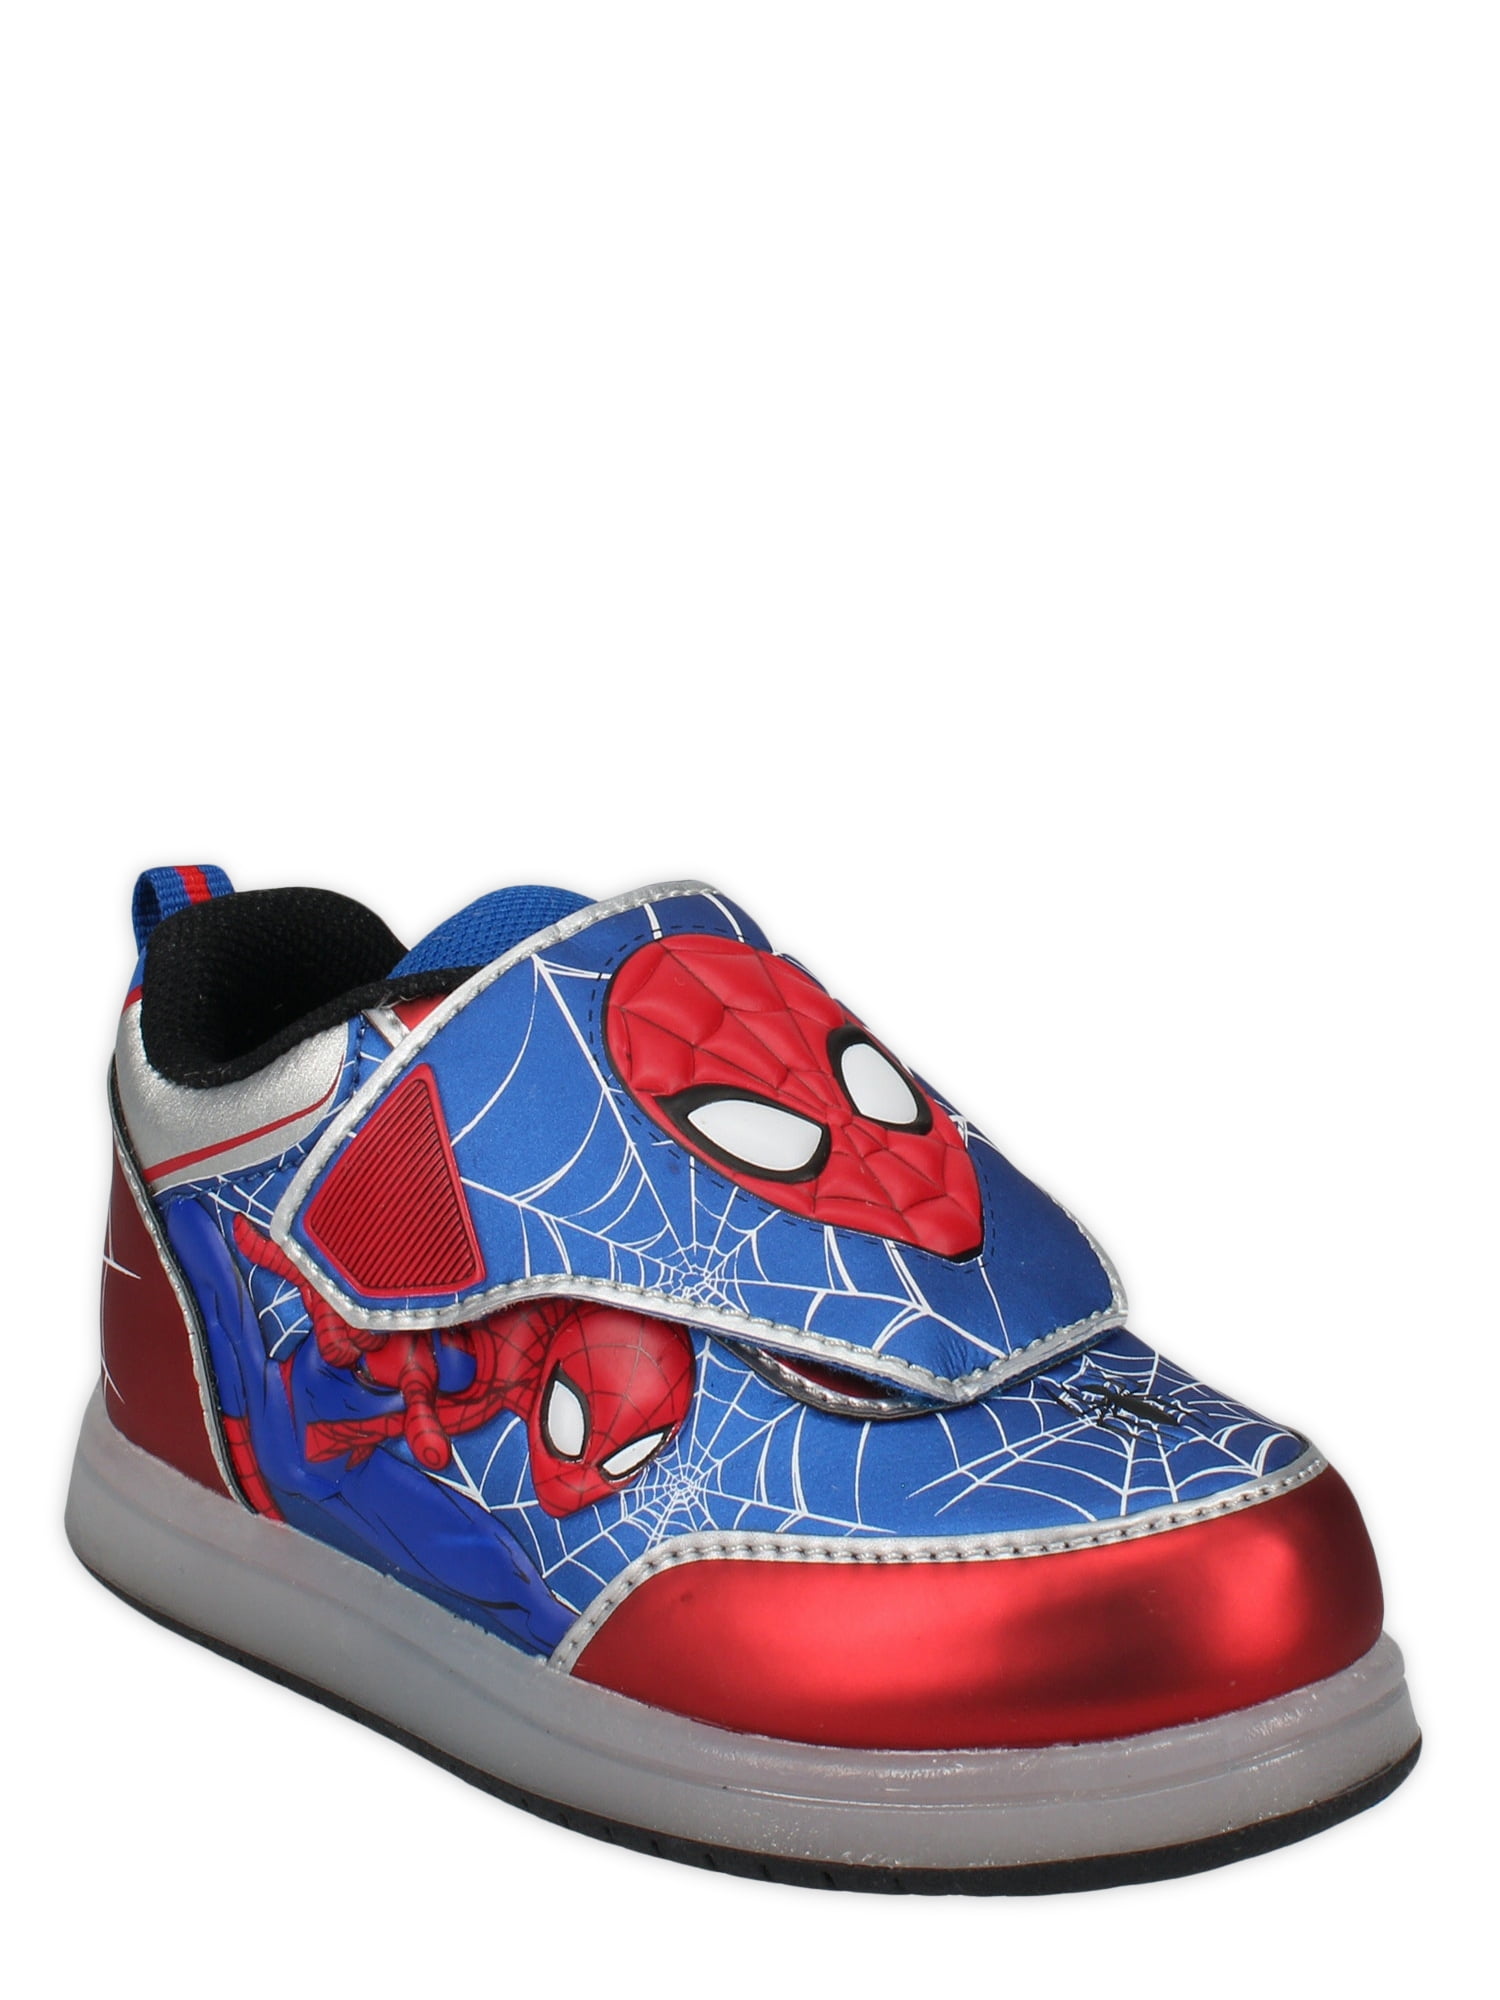 FAVORITE CHARACTERS BOY'S SPIDER-MAN OSPF380 LIGHTED ATHLETIC SNEAKER